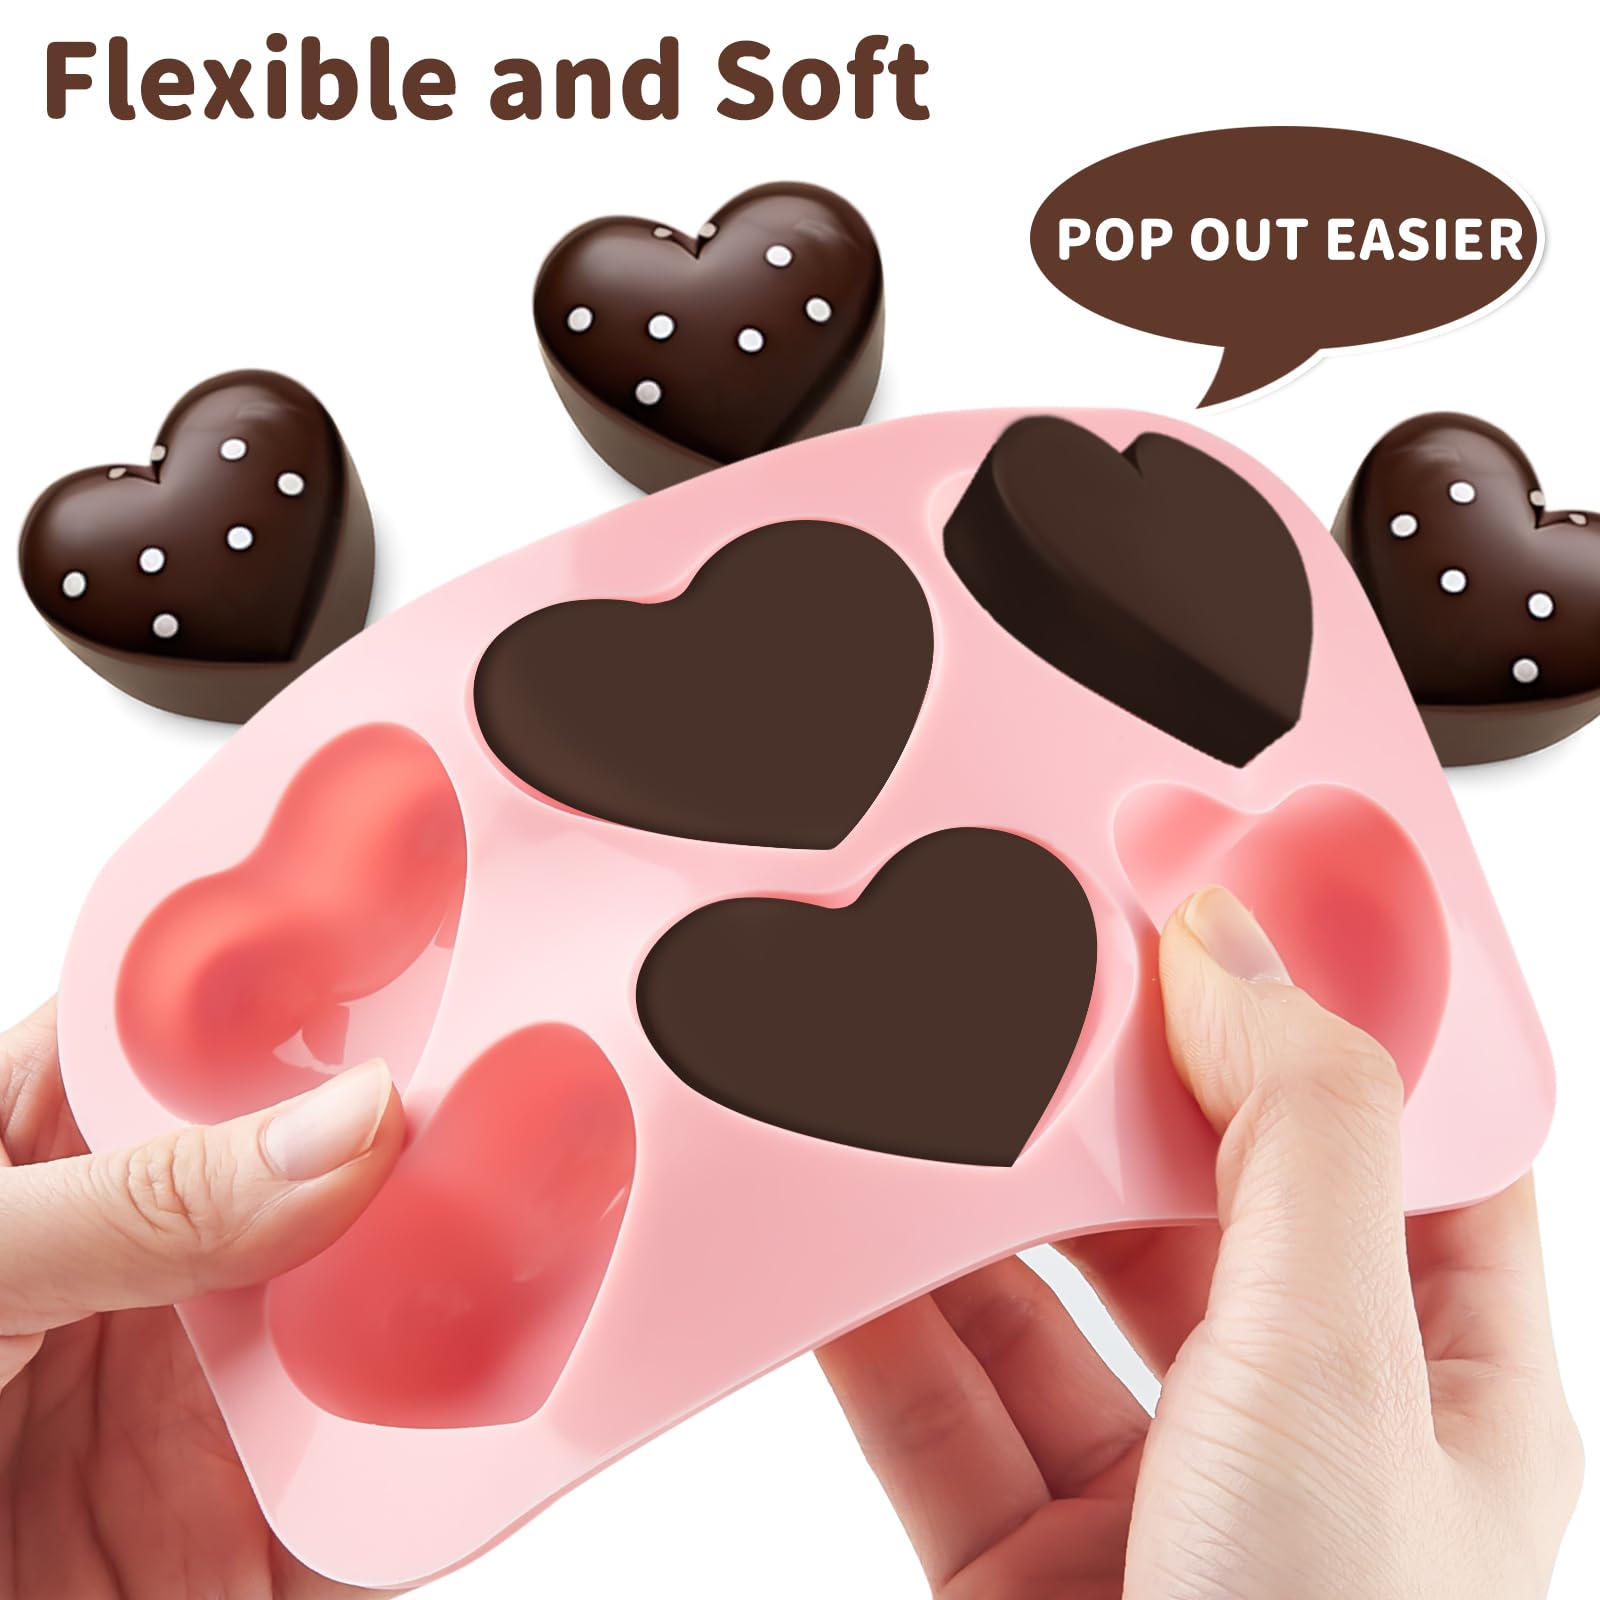 JOERSH 3 Pieces Heart Silicone Molds, Heart Shape Chocolate Candy Molds Non Stick Baking Molds for Valentine's Day Chocolate, Pudding, Cake, Candy, Jelly, Soap